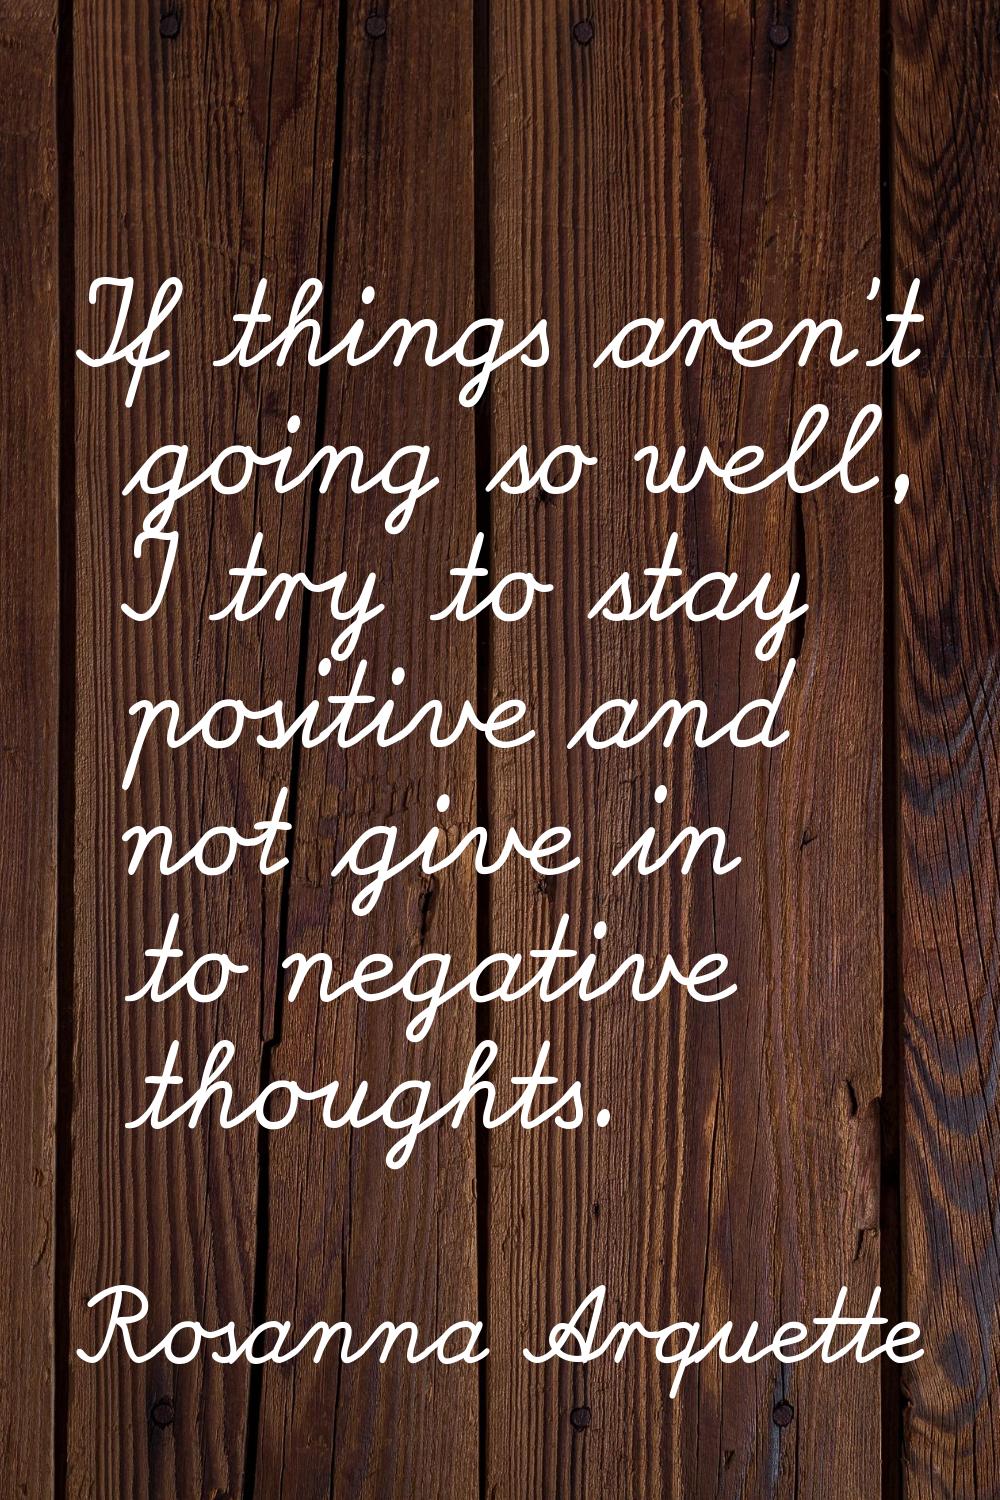 If things aren't going so well, I try to stay positive and not give in to negative thoughts.